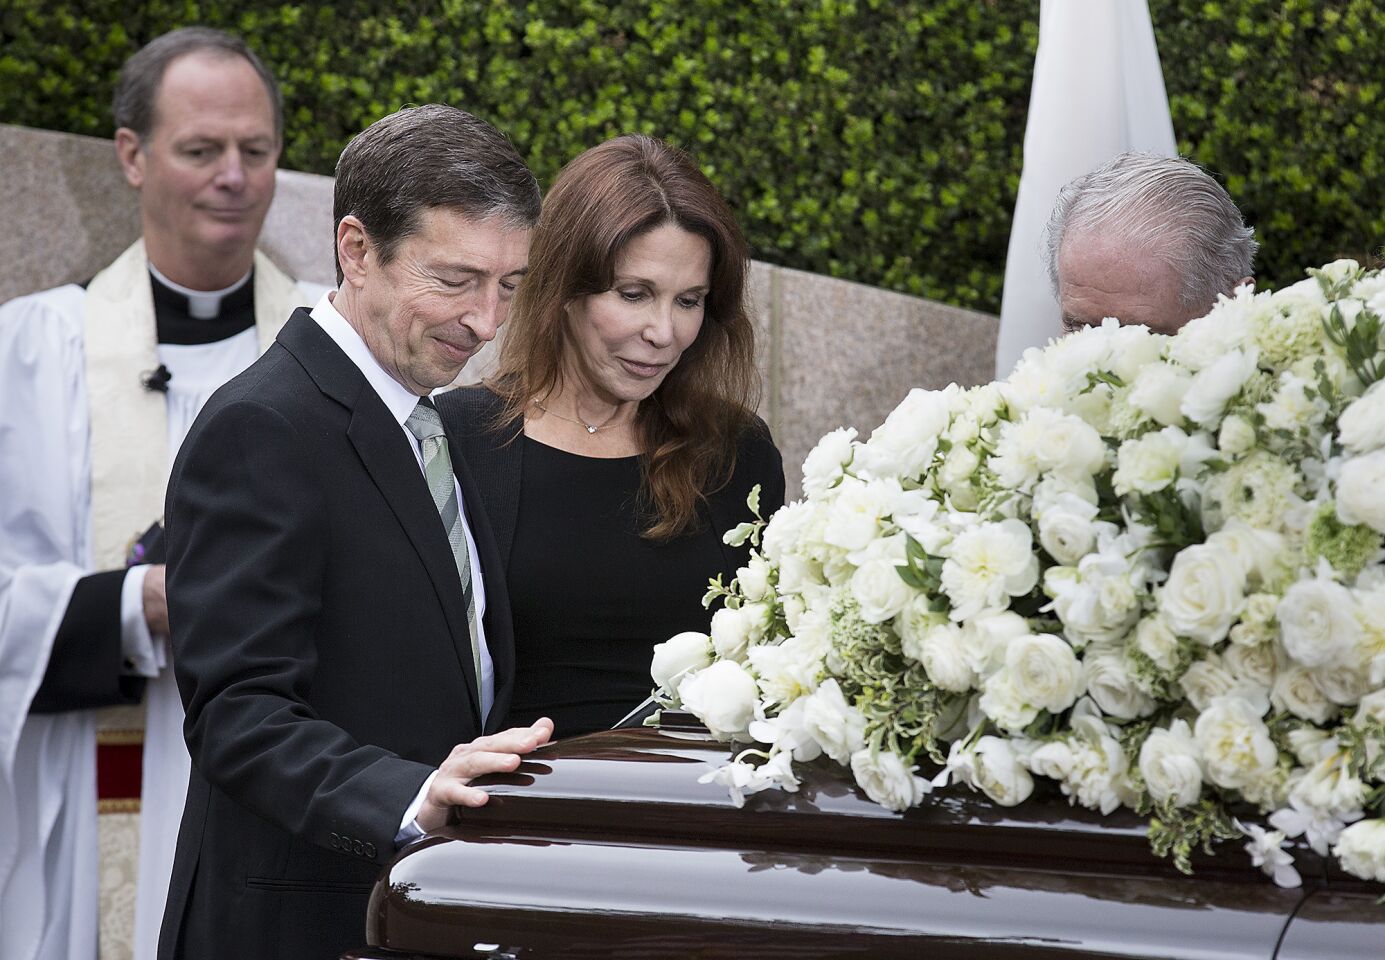 Ron Reagan, second from left, and his sister, Patti Davis, pause at their mother Nancy Reagan's casket at her gravesite at the Ronald Reagan Presidential Library in Simi Valley.